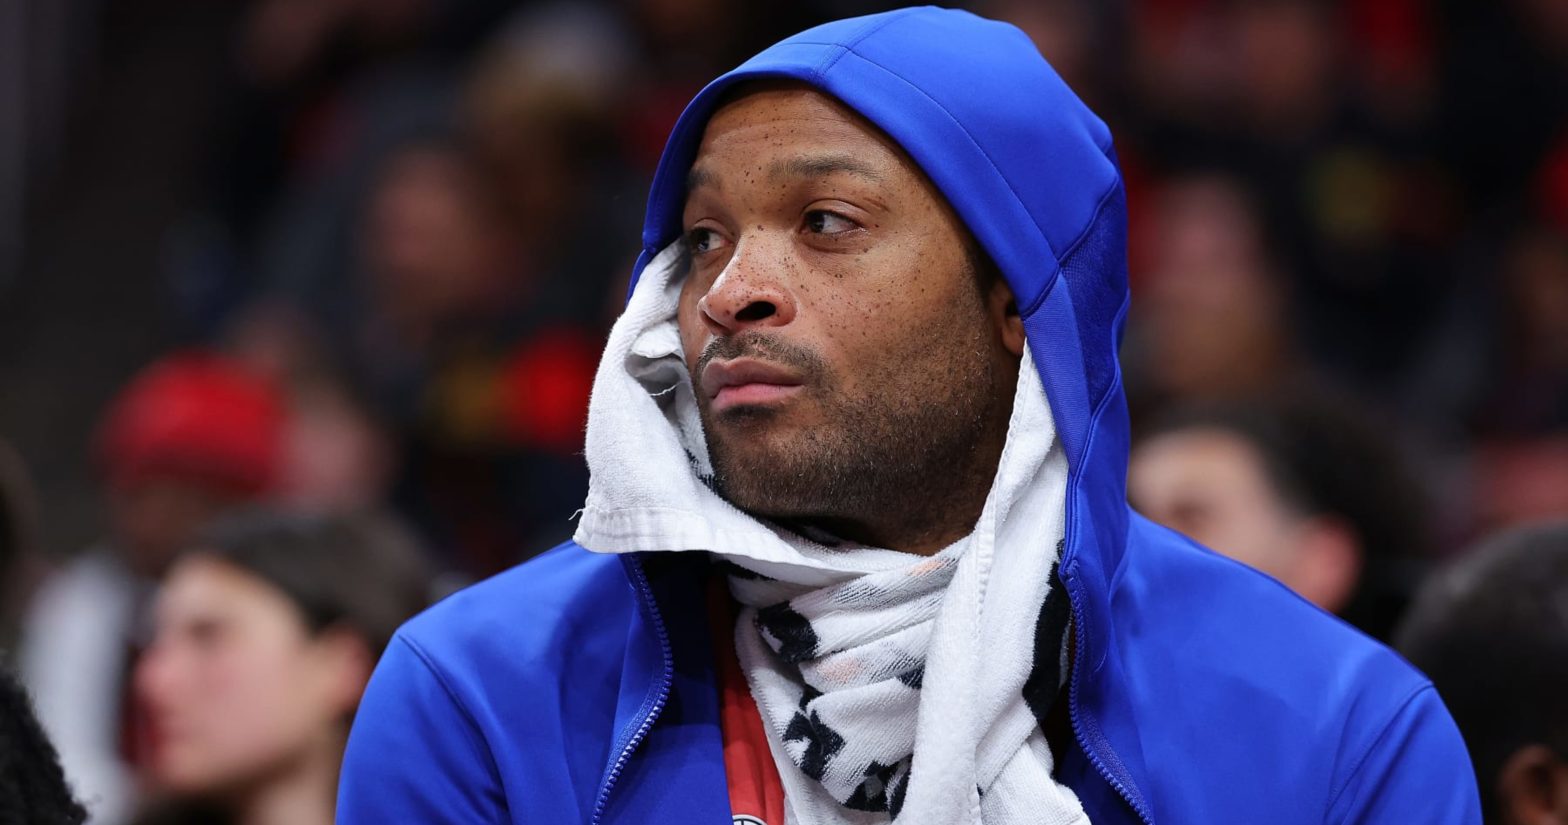 Clippers Rumors: P.J. Tucker Contract Buyout Not Considered Ahead of NBA Playoff Push